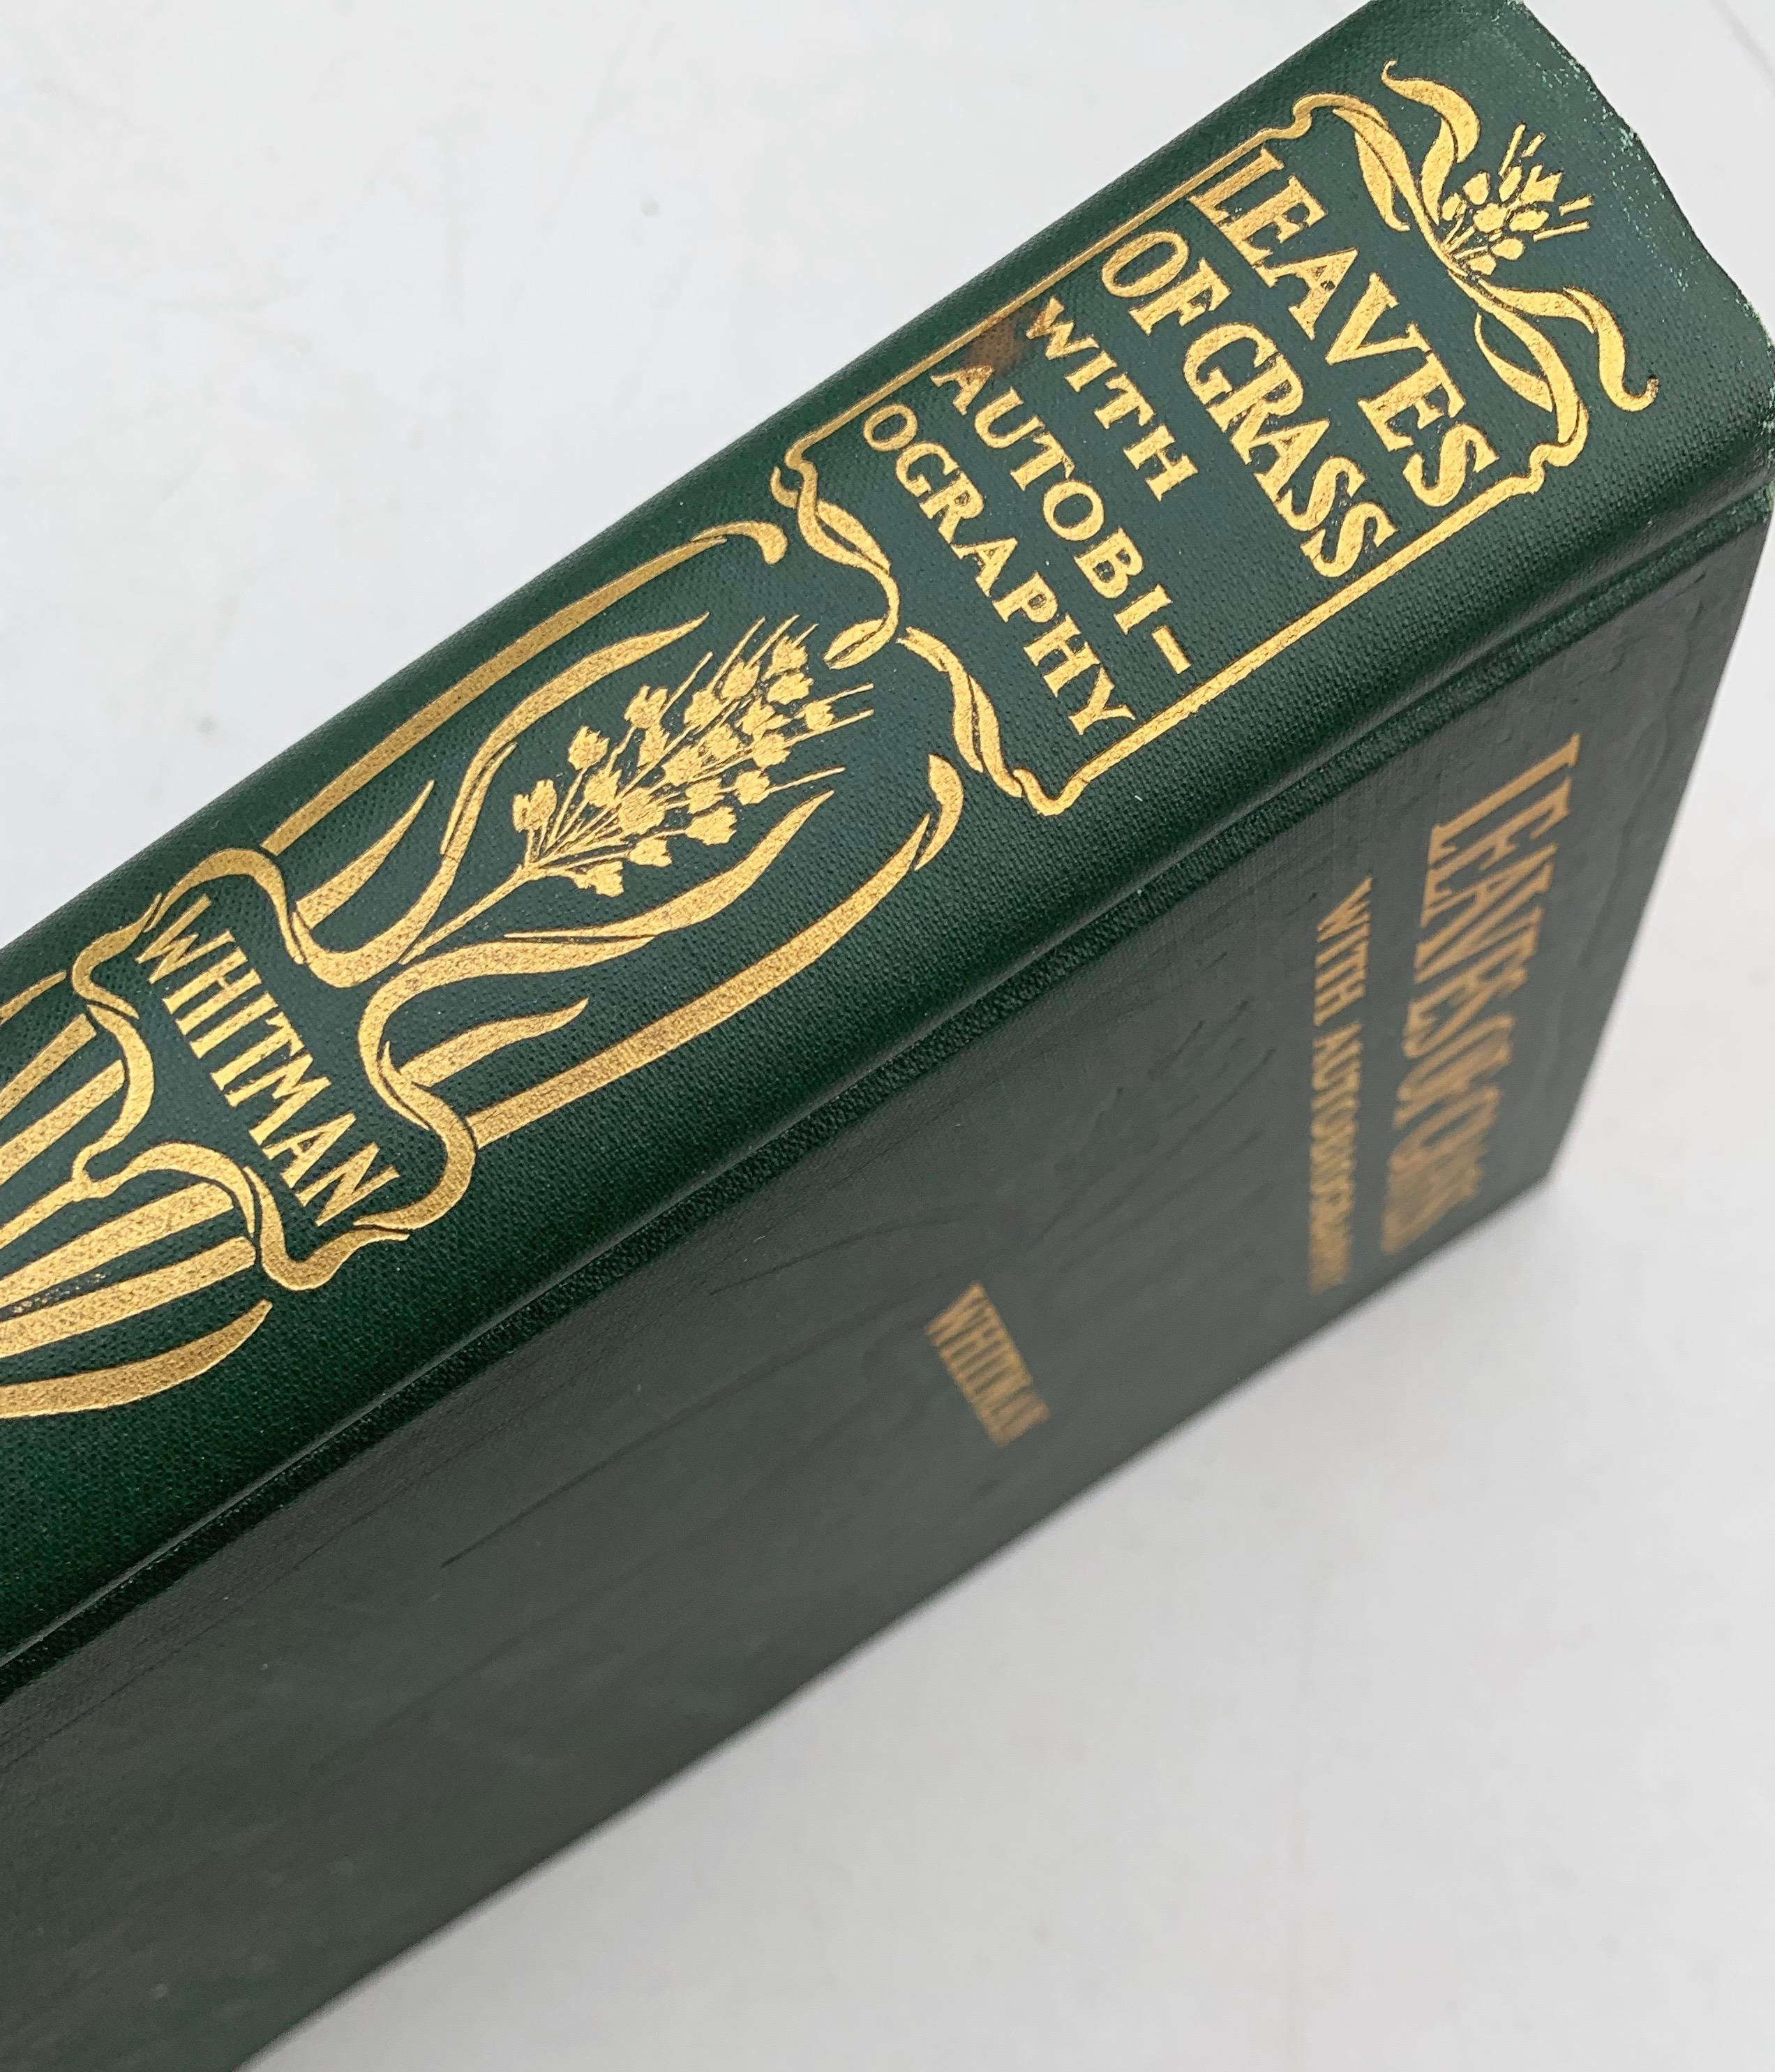 Leaves Of Grass With Autobiography by WALT WHITMAN (1900)